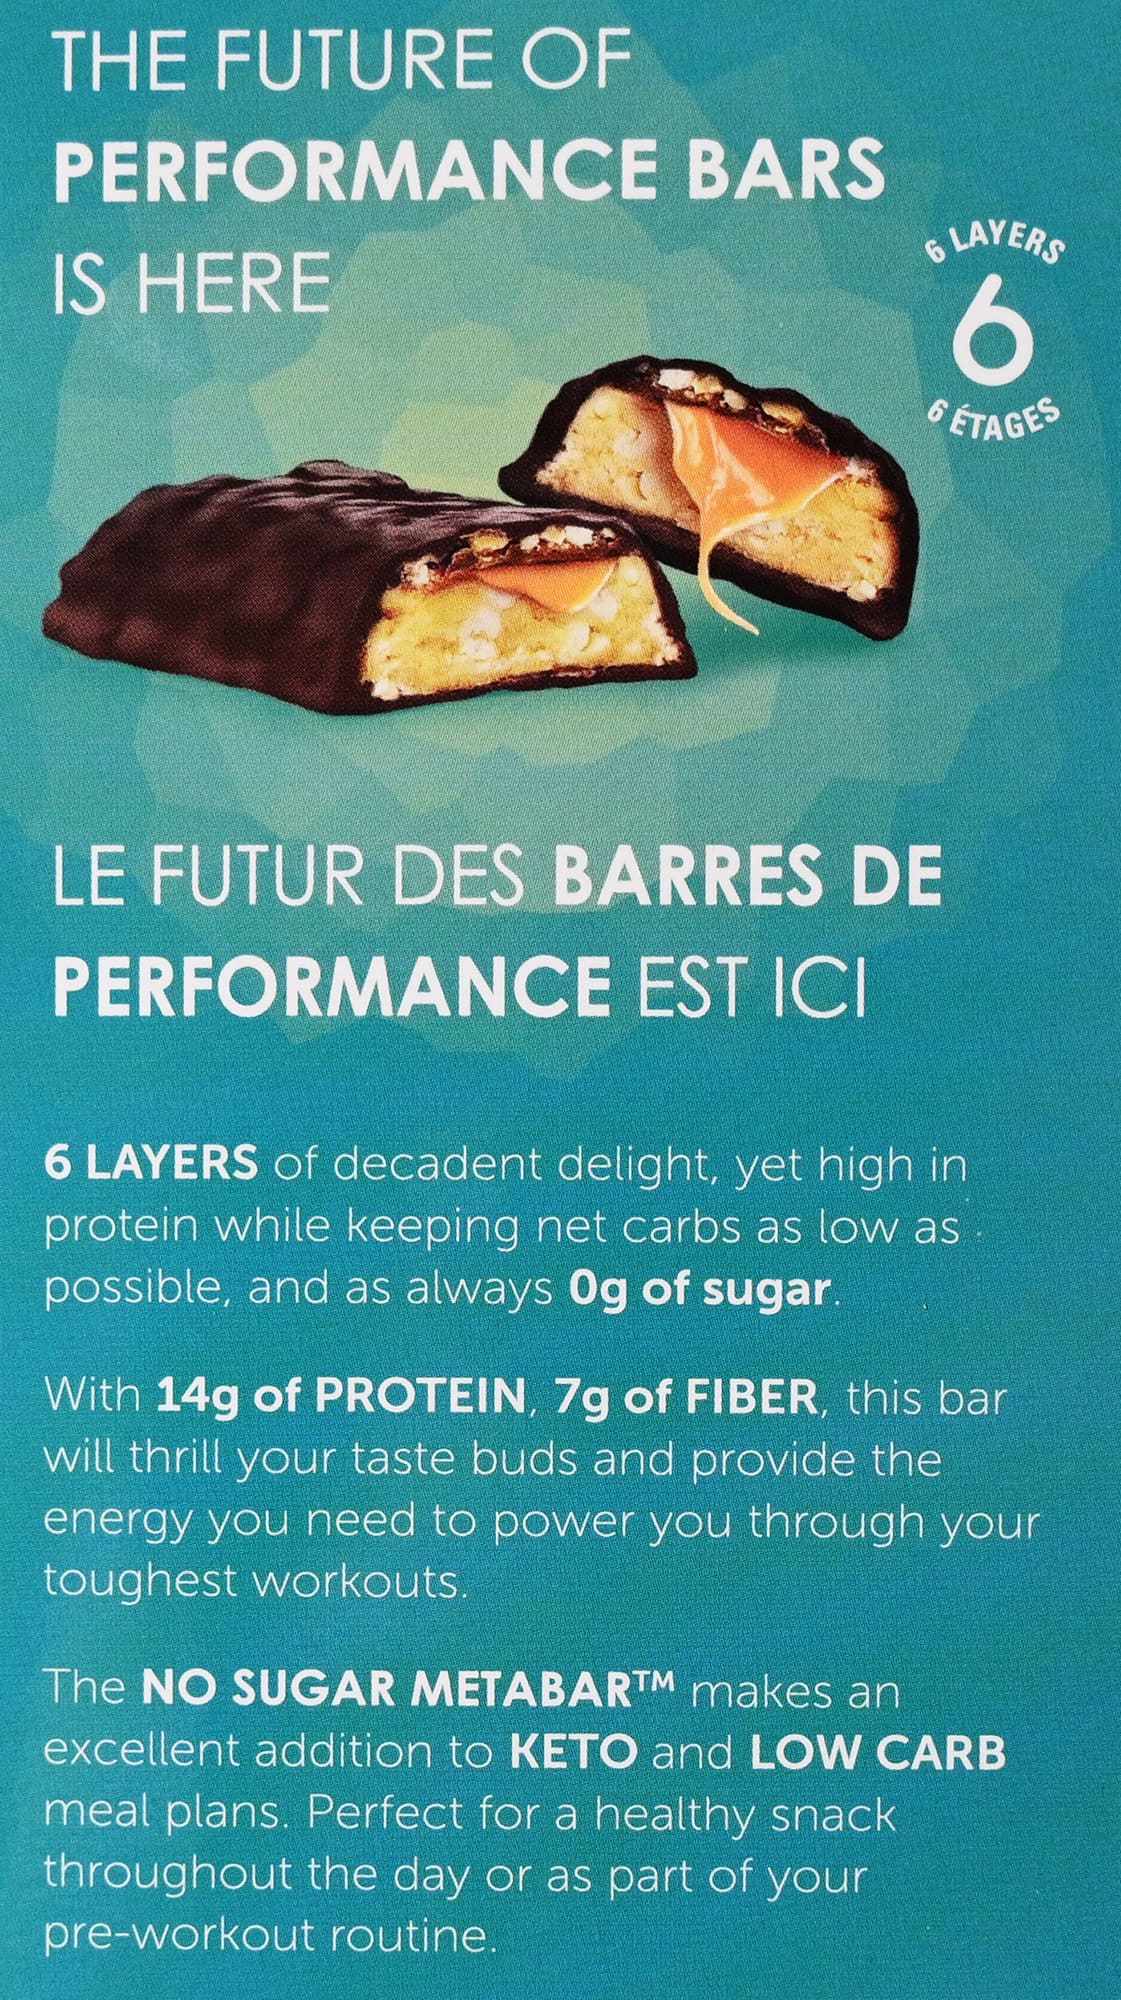 Image of the product description for the bars from the back of the box.